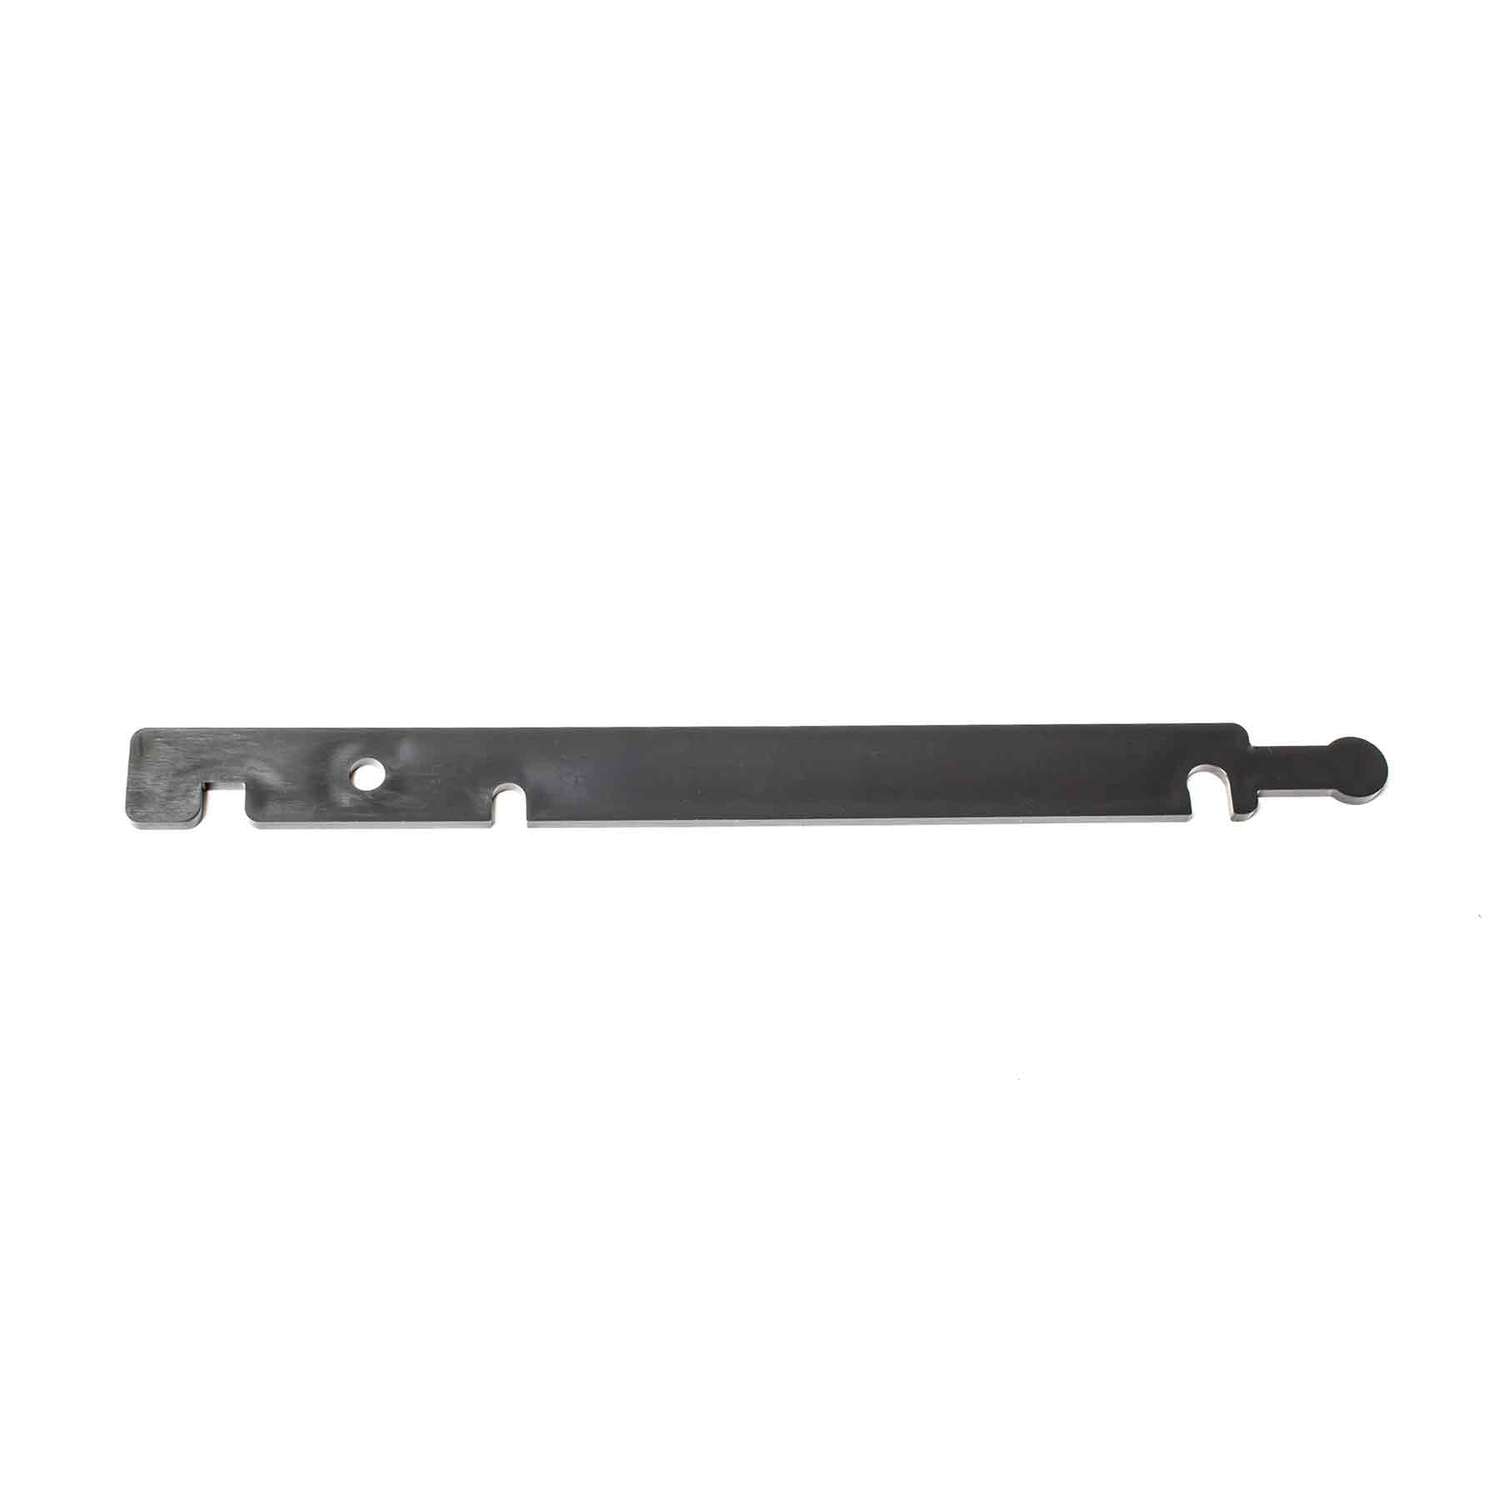 18-9807 Shift Cable Adjustment Tool replaces: Mercury Marine 91